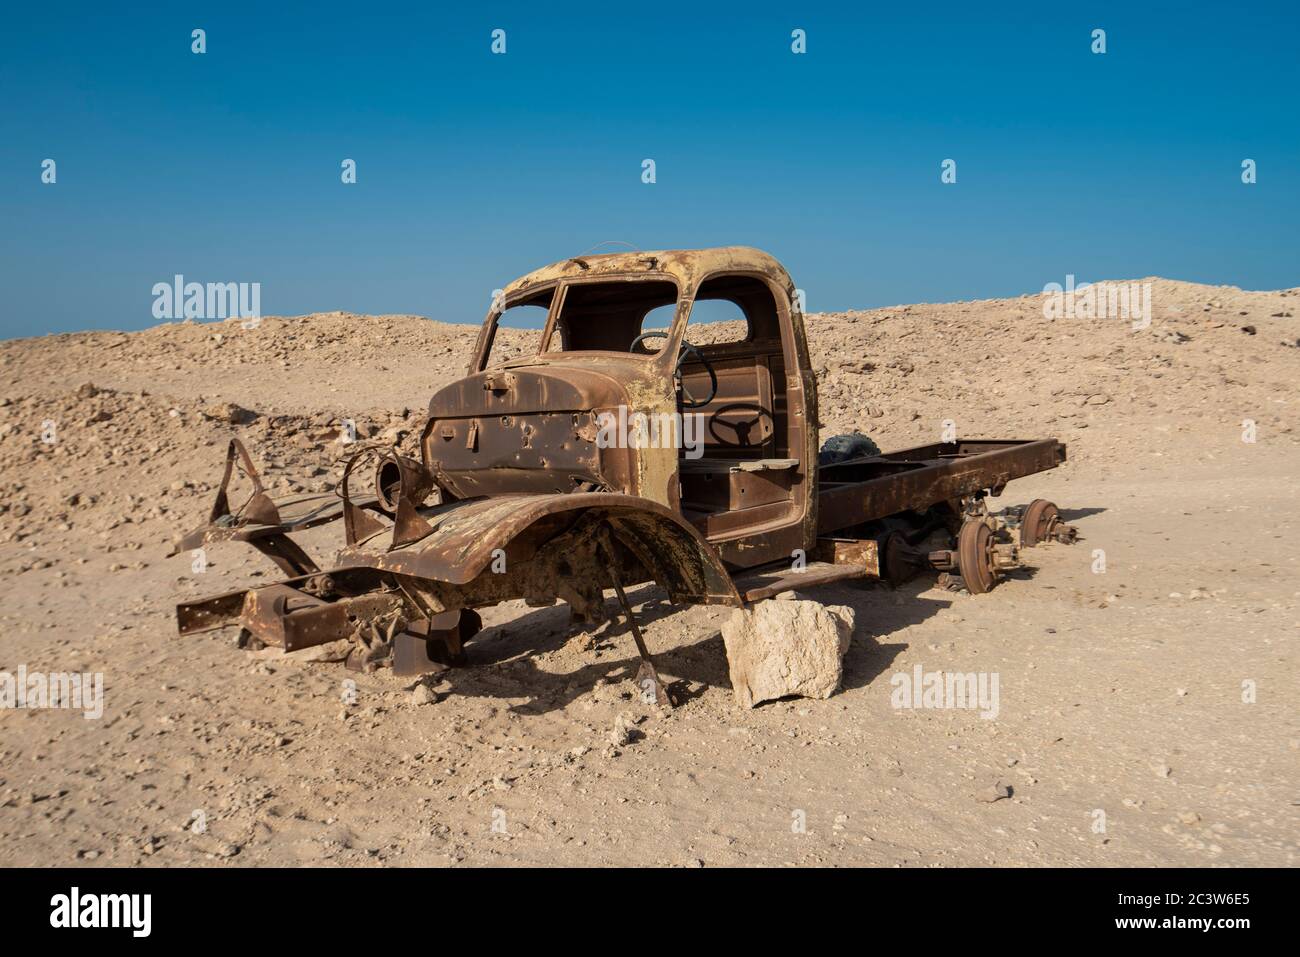 Remains of a rusty old abandoned derelict truck left in the desert to decay Stock Photo